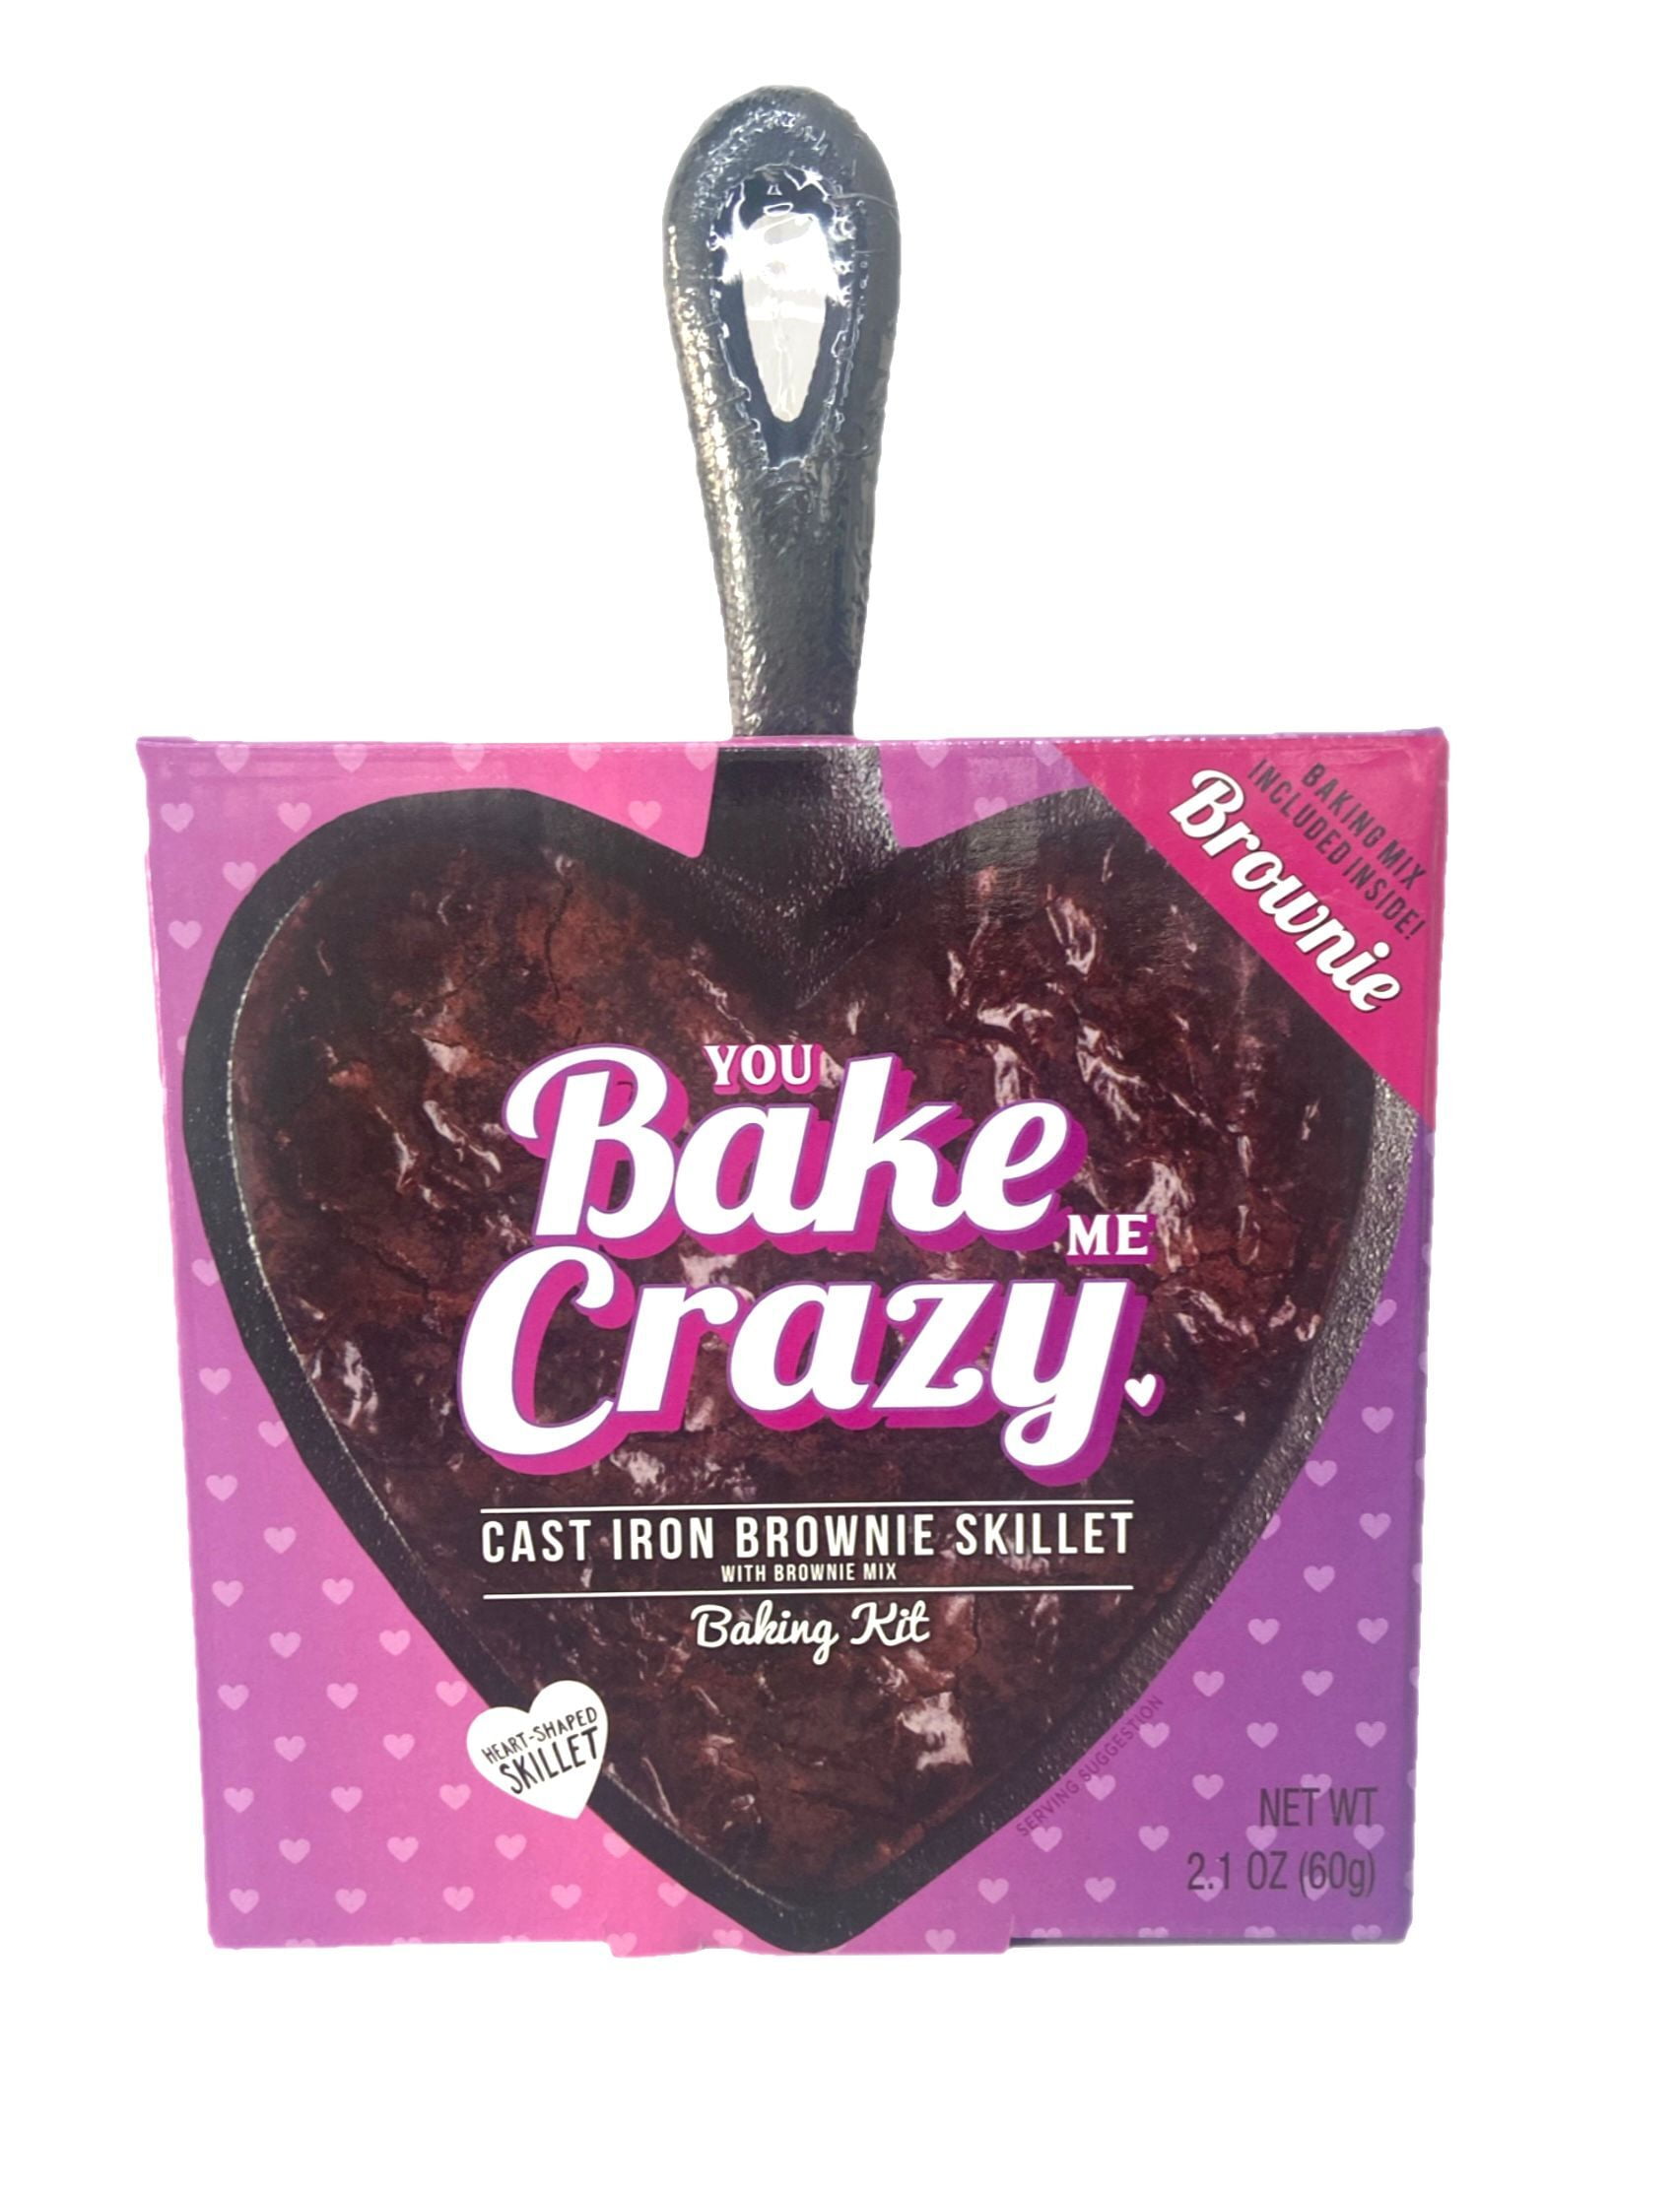 The Modern Gourmet Brownie Skillet: Heart Shaped Cast Iron Skillet, Brownie Mix 2.1 OZ